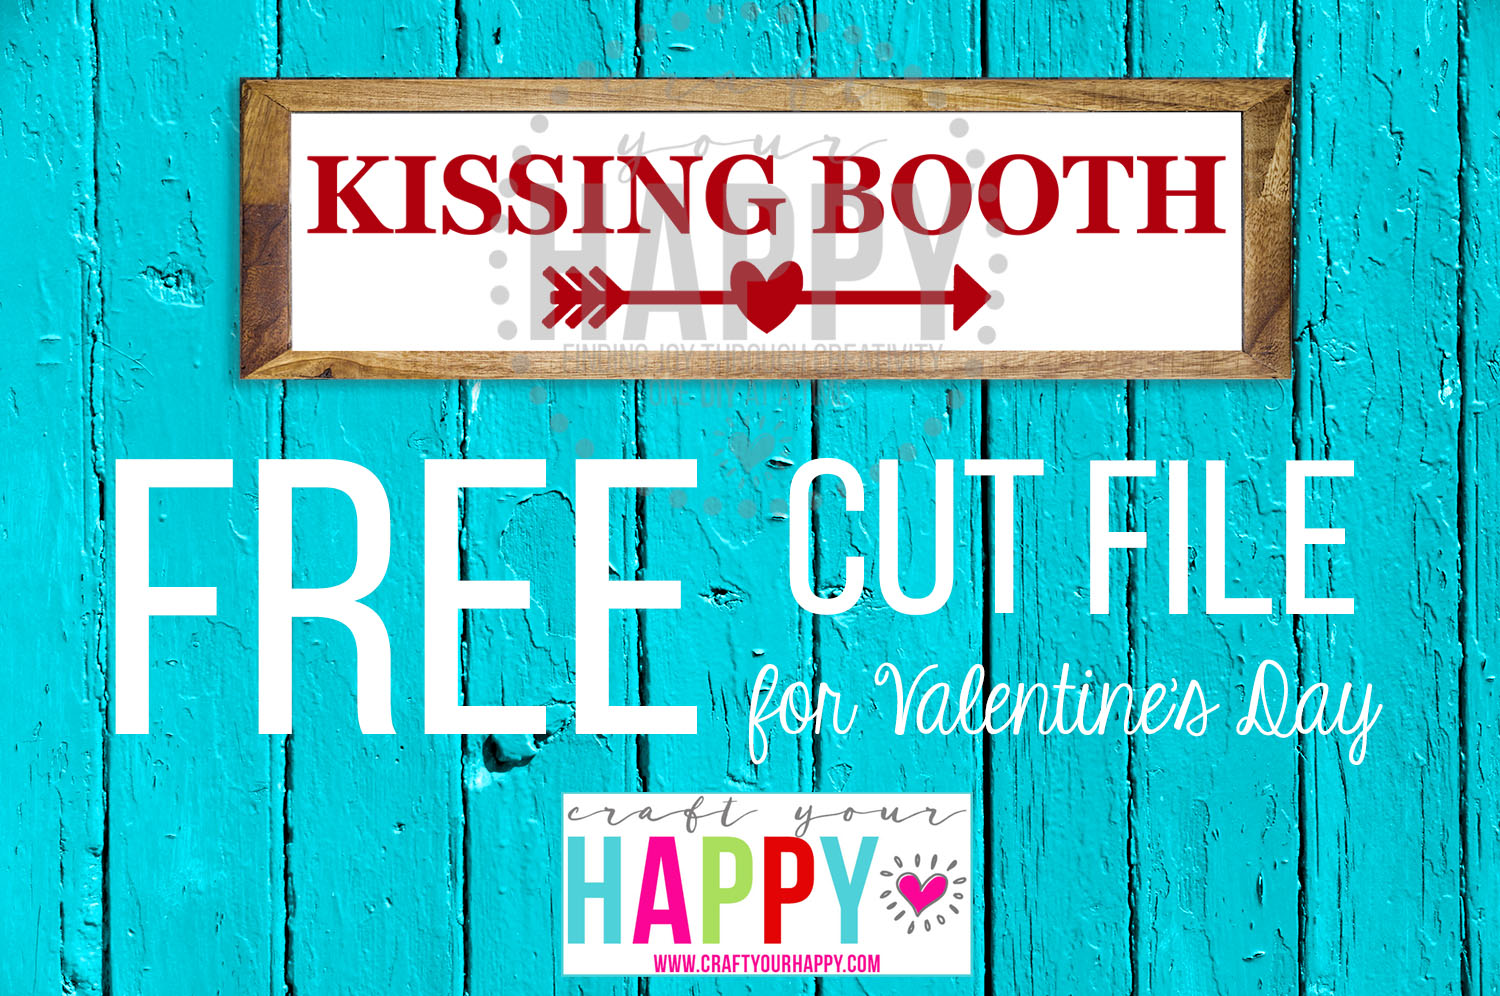 download the kissing booth free